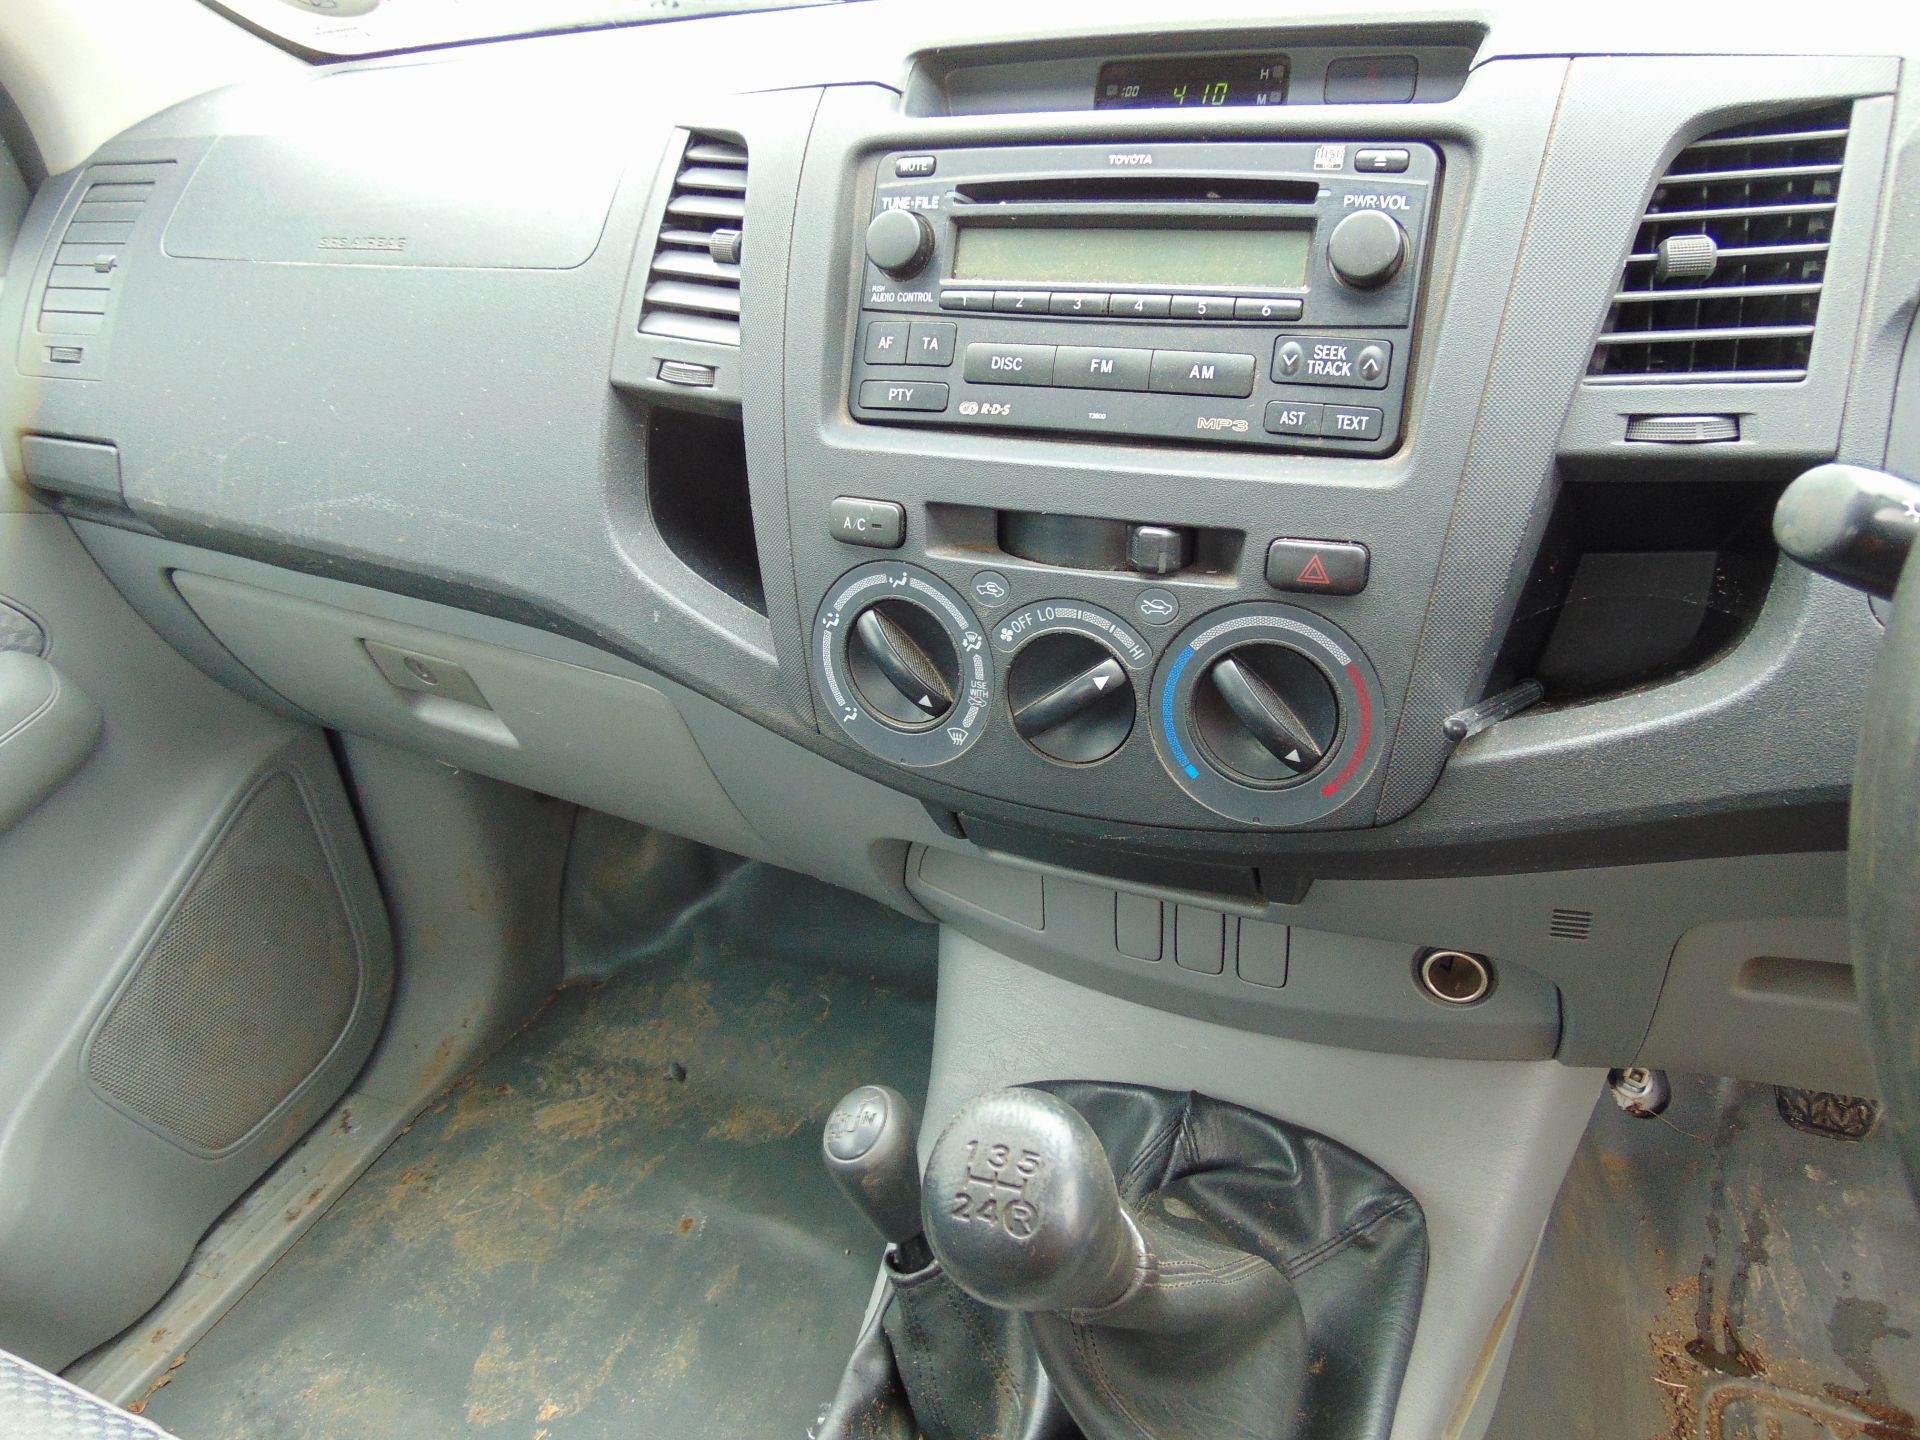 2007 Toyota Hilux 2.5 D4D Pickup - Image 10 of 17